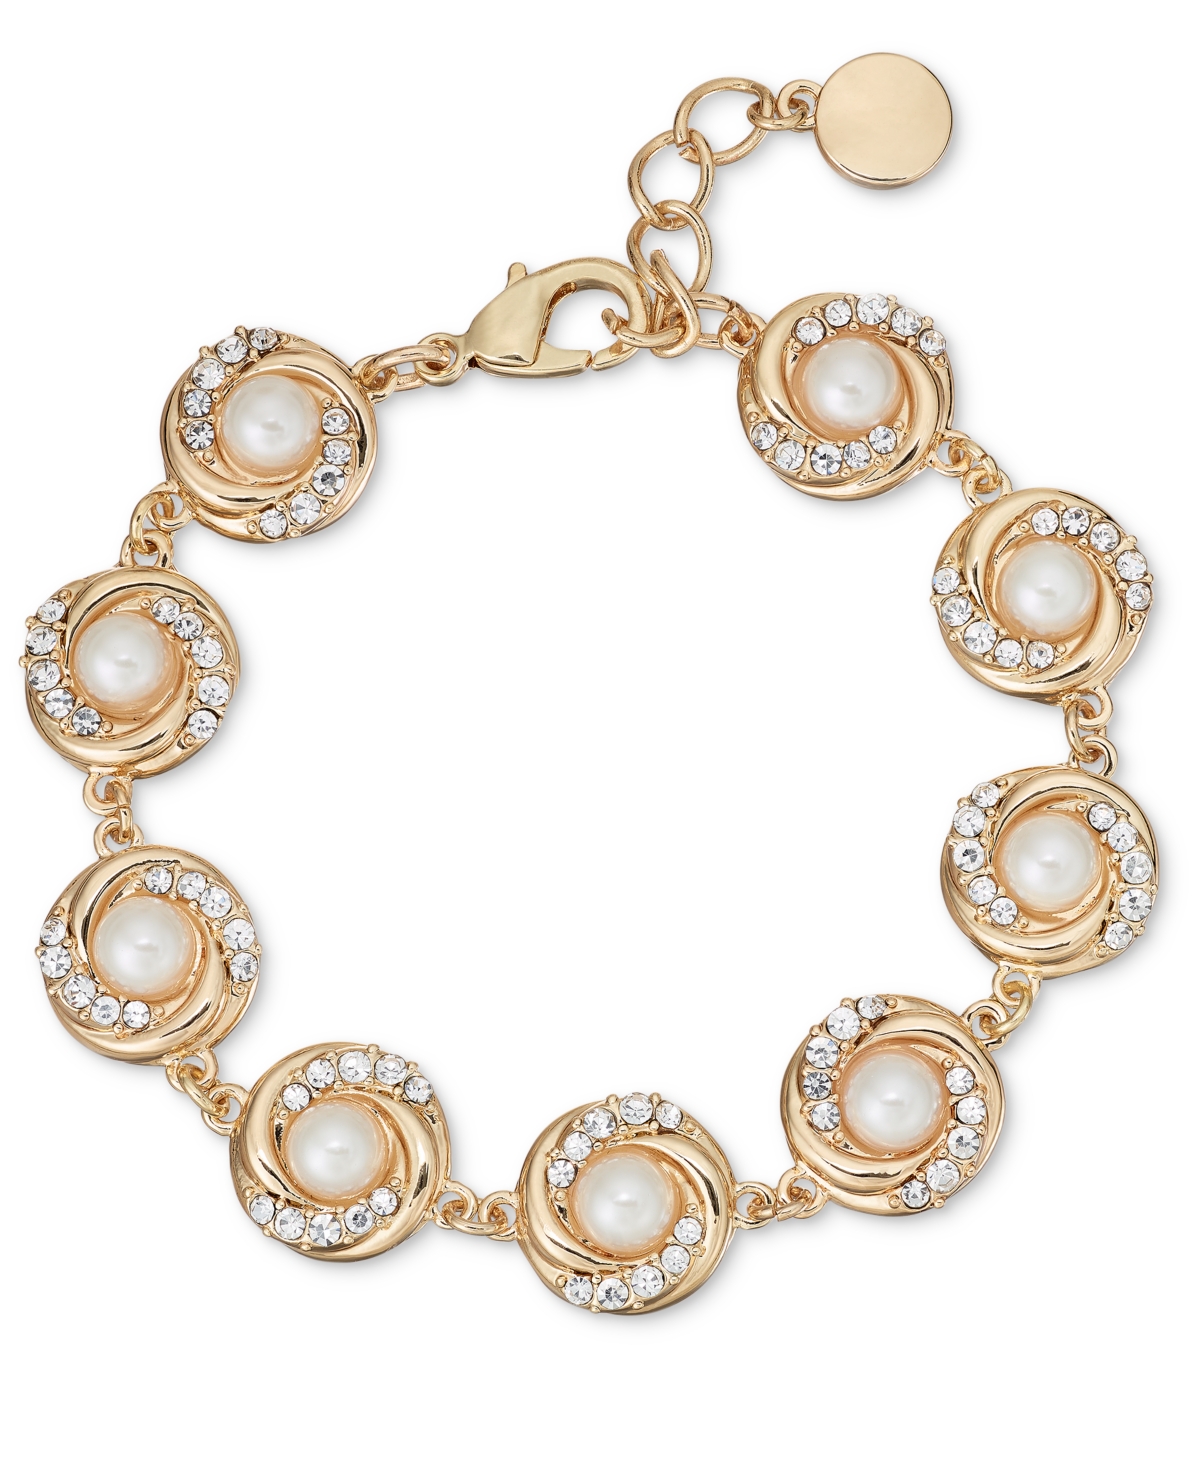 Gold-Tone Pave & Imitation Pearl Flex Bracelet, Created for Macy's - Gold